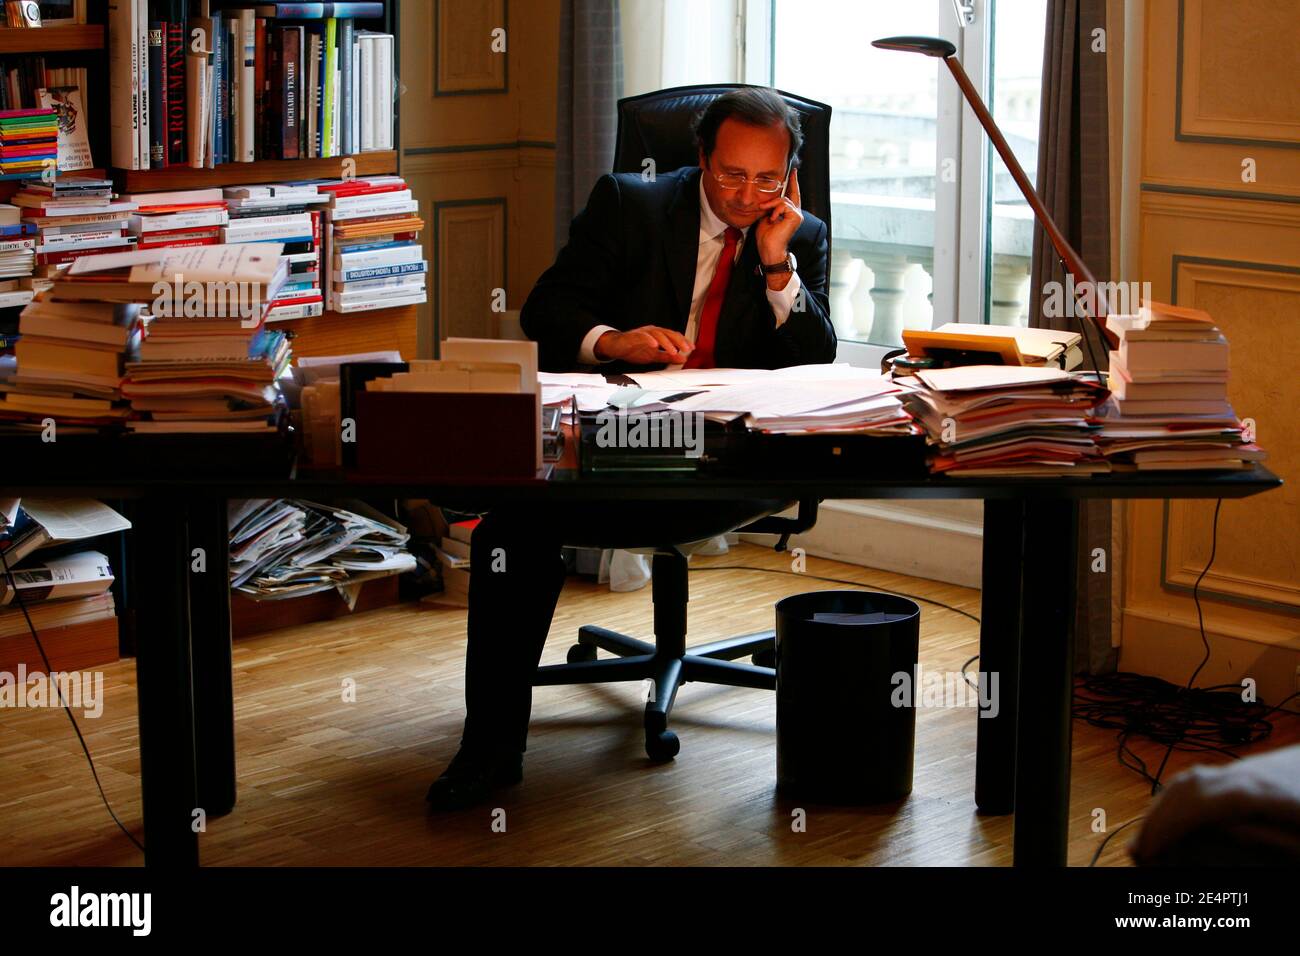 French Socialist party leader Francois Hollande in his office at the  Socialist Party's headquarters, rue de Solferino, in Paris, France, on  January 17, 2008. Photo by Elodie Gregoire/ABACAPRESS.COM Stock Photo -  Alamy